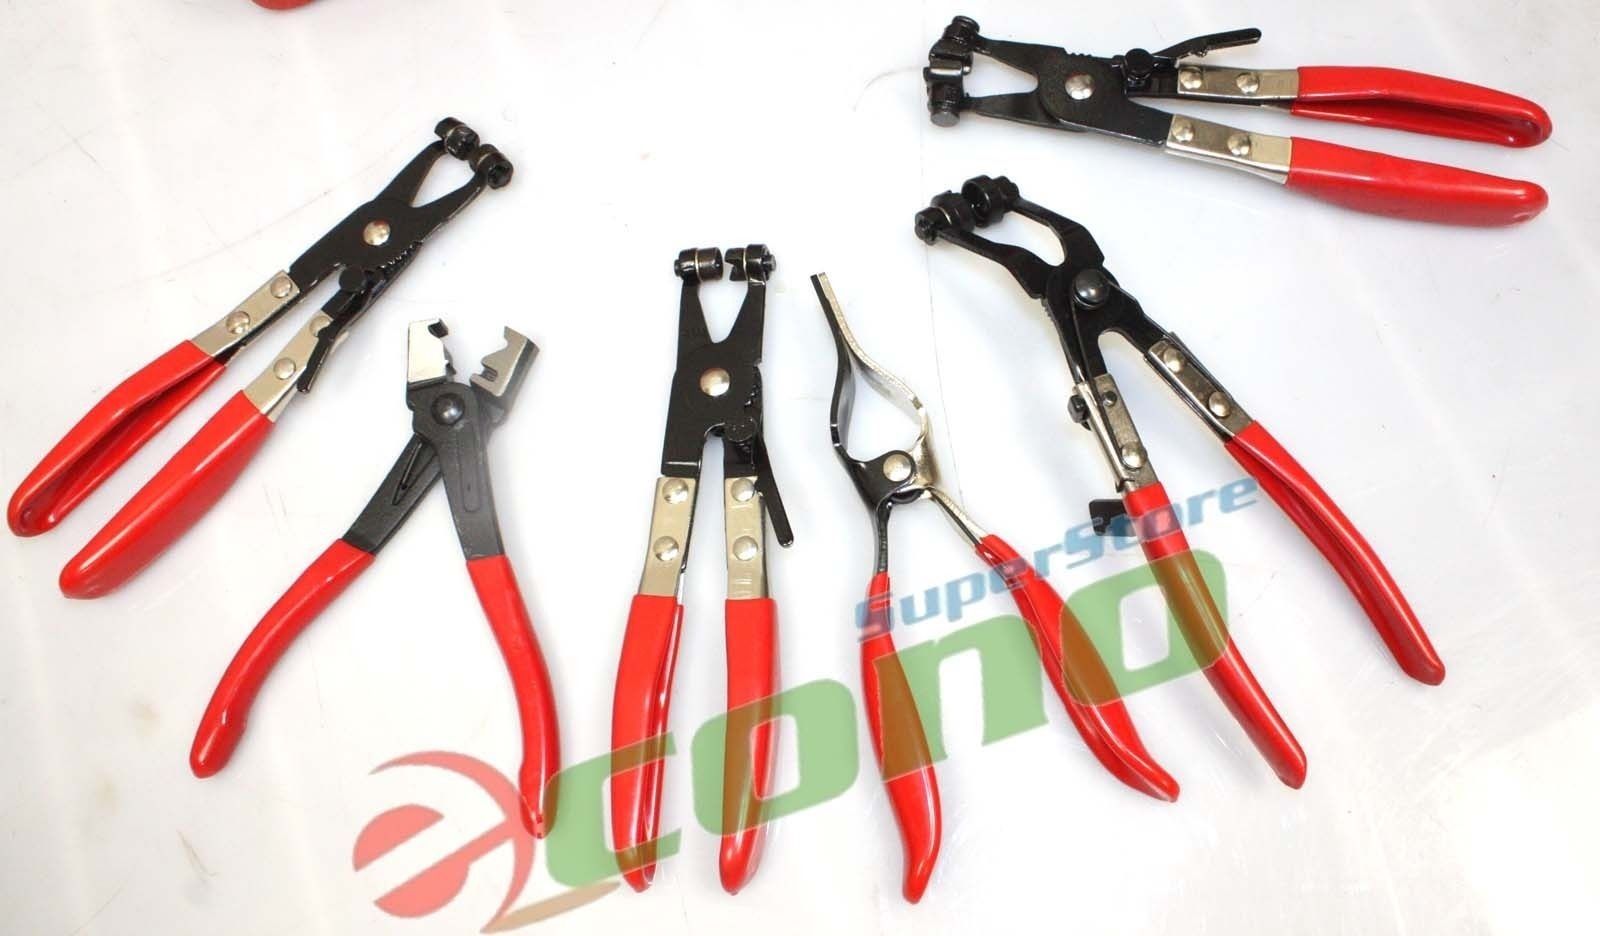 1pc Flexible Extended 24" Cable Wire Hose Clamp Plier Automotive Tool Oil Fuel 